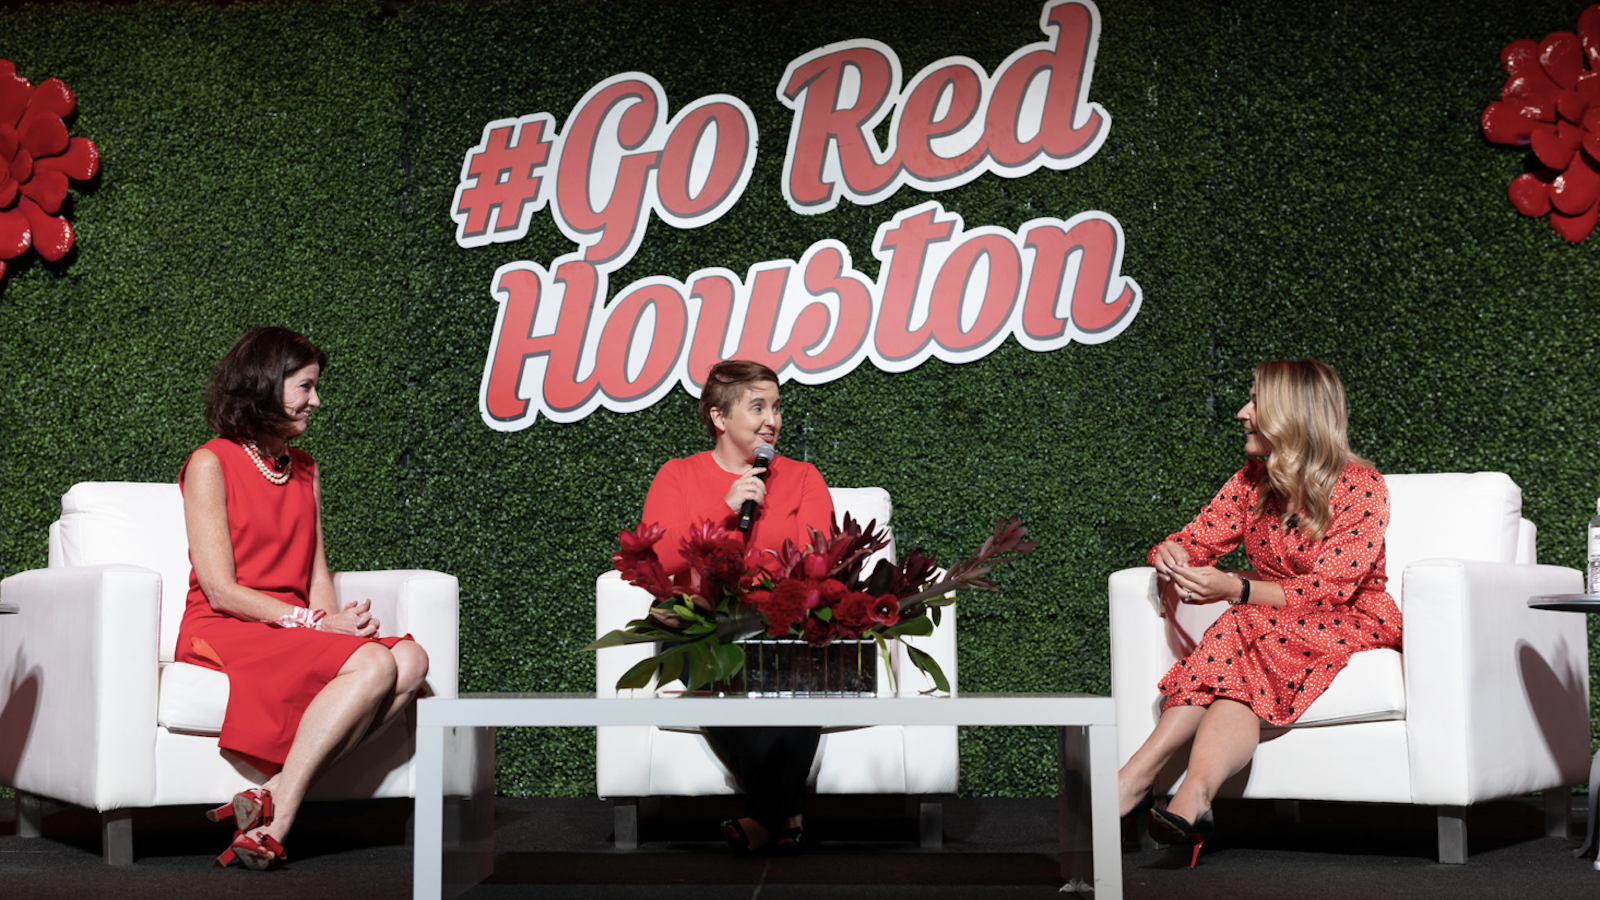 Dr. Costello and Dr. Coulter Speak at the AHA Go Red Luncheon